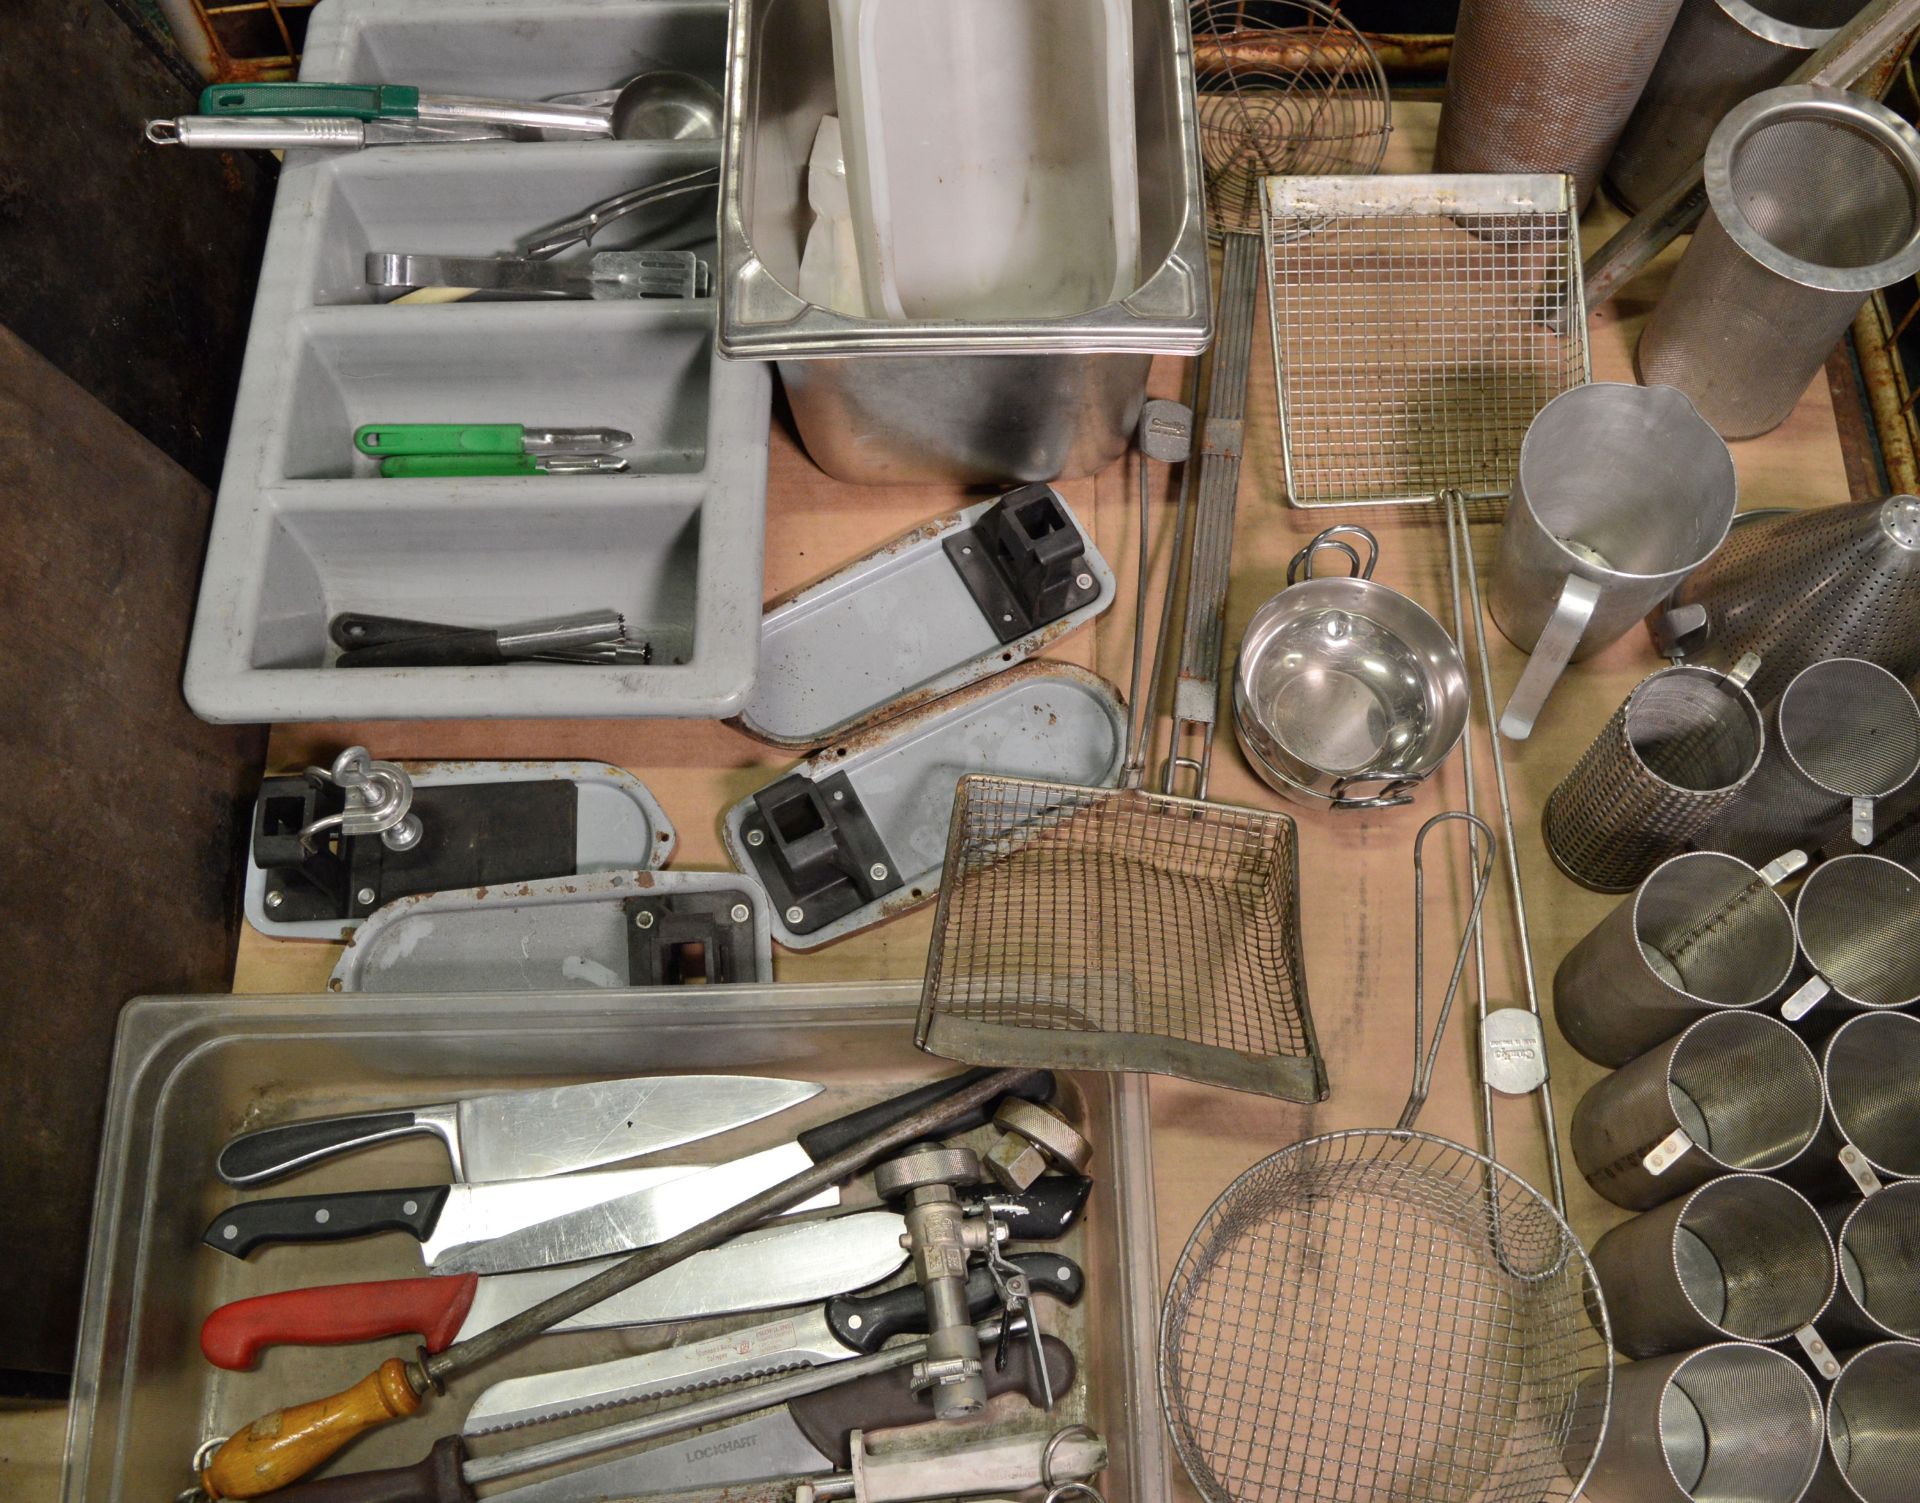 Catering Equipment, Serving Bowl, Ladles, Spoons. - Image 2 of 3